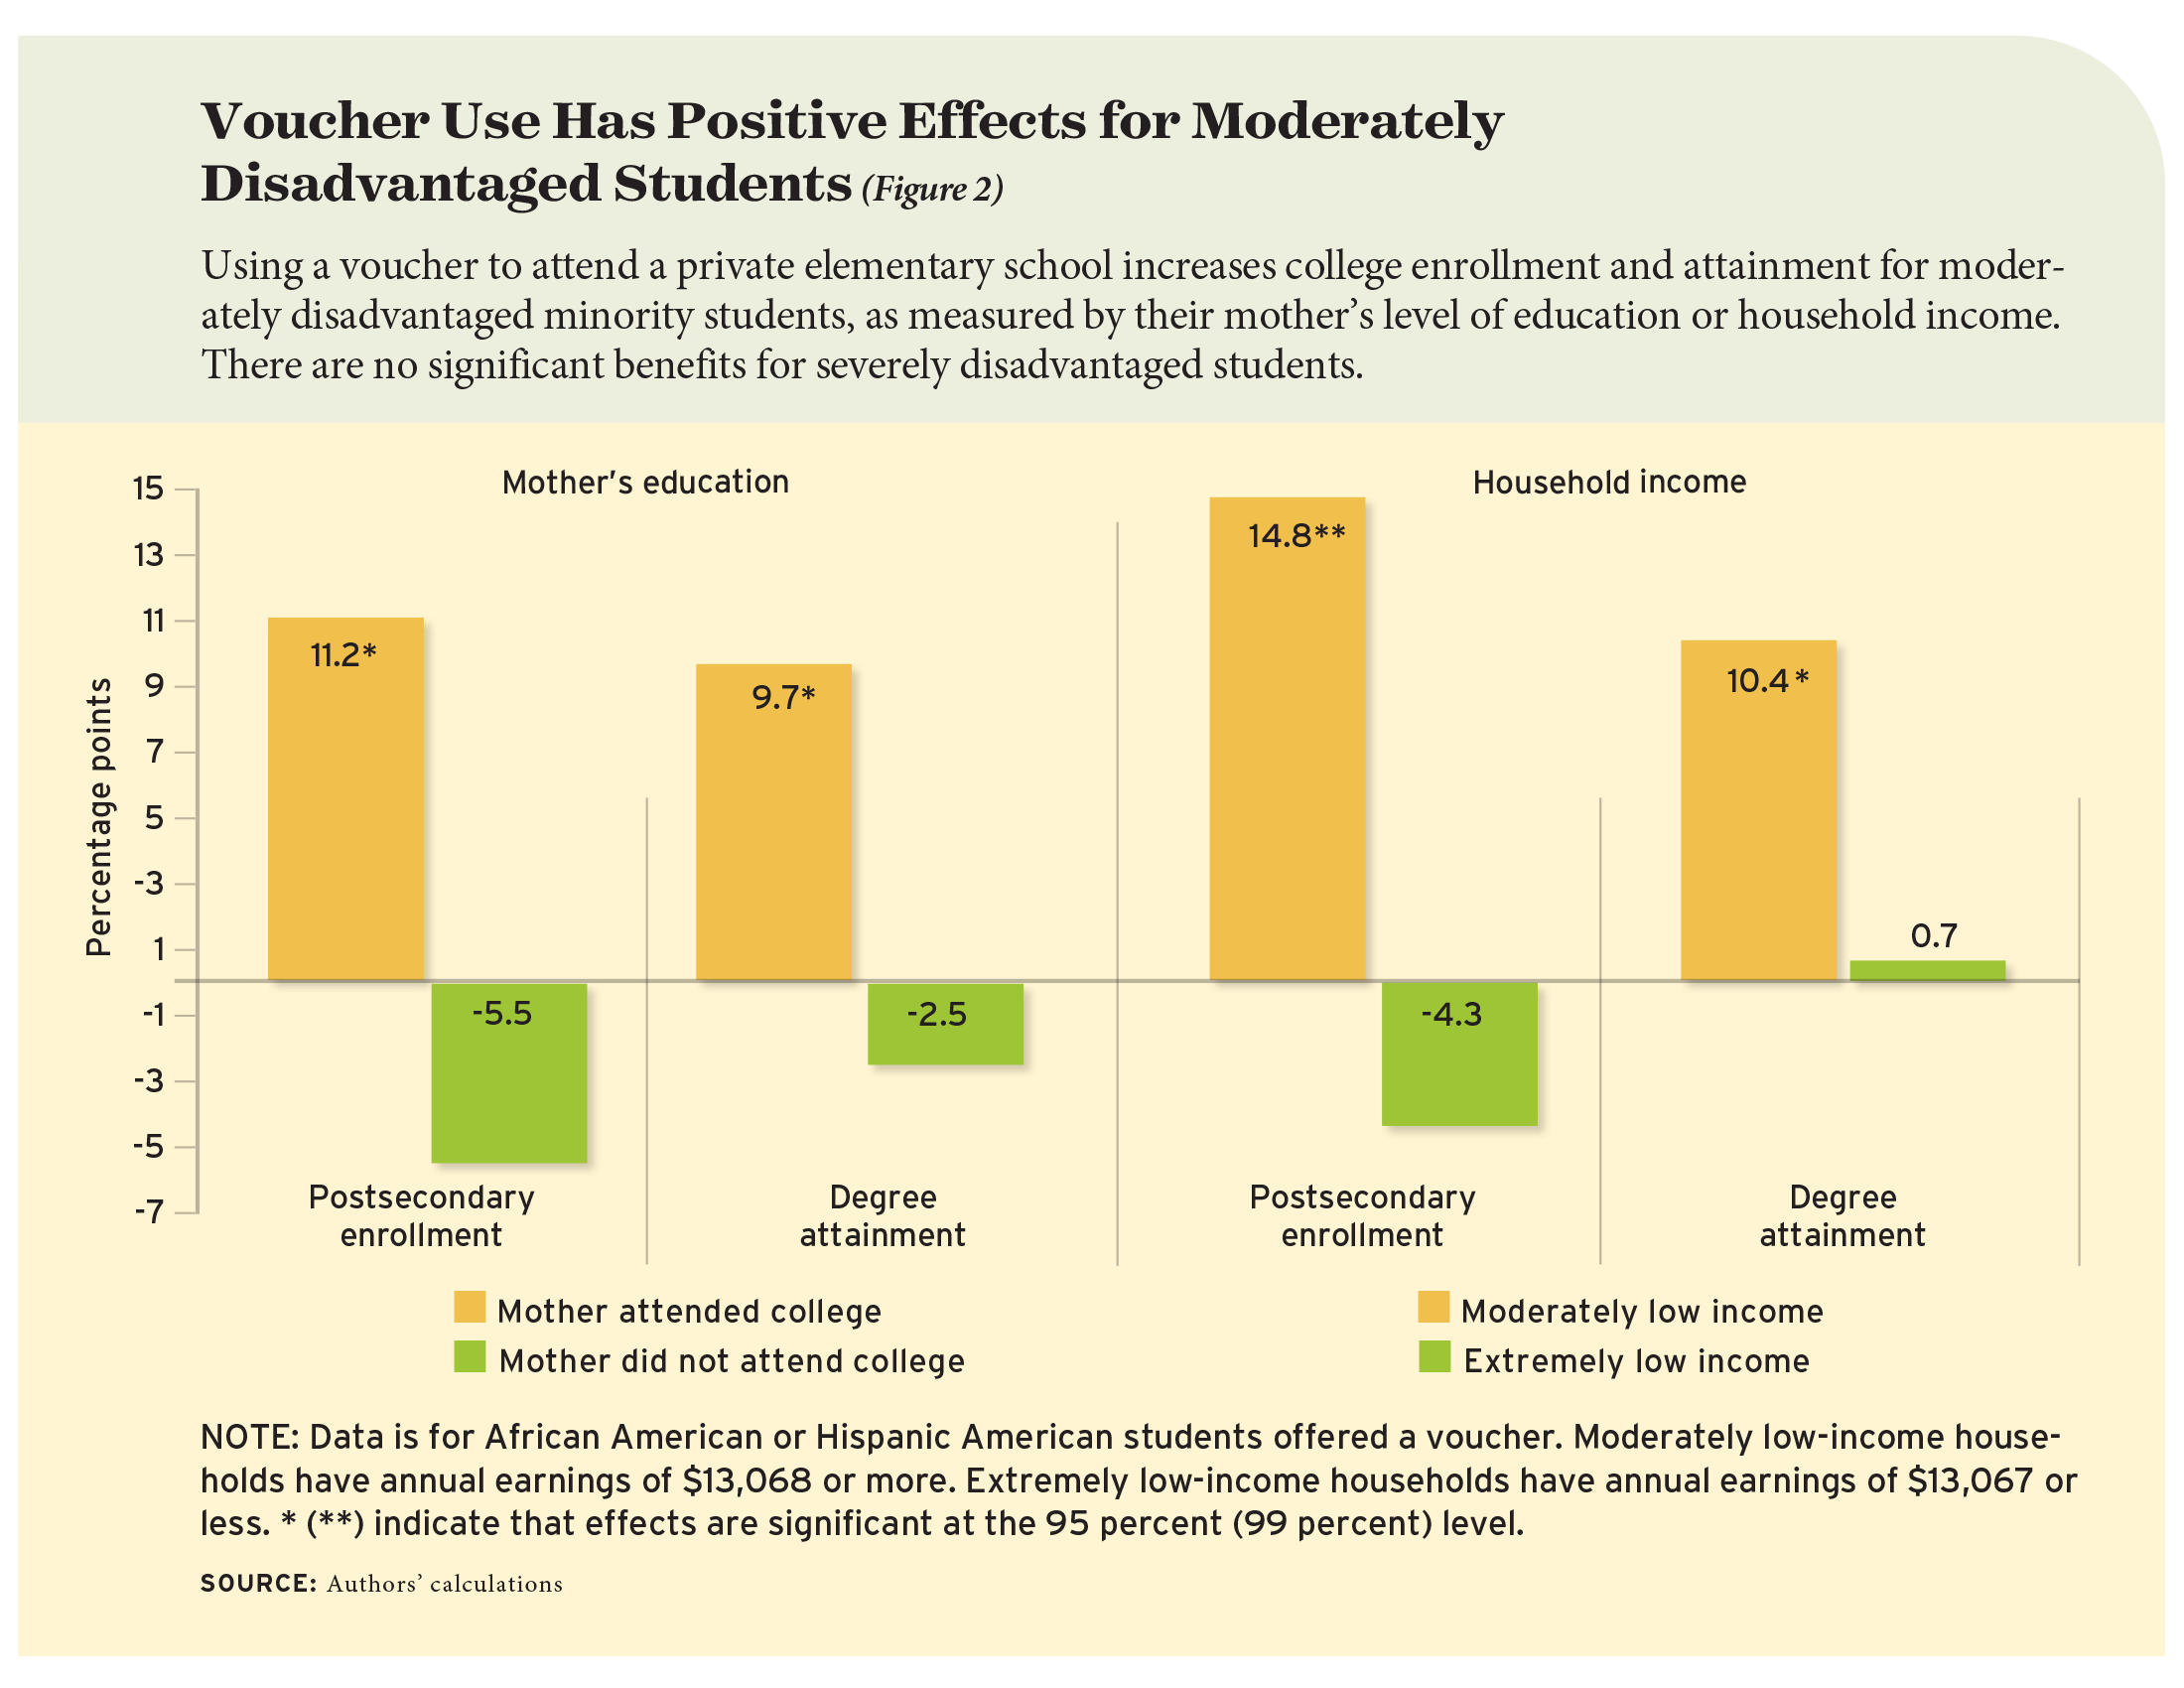 Figure 2: Voucher Use Has Positive Effects for Moderately Disadvantaged Students